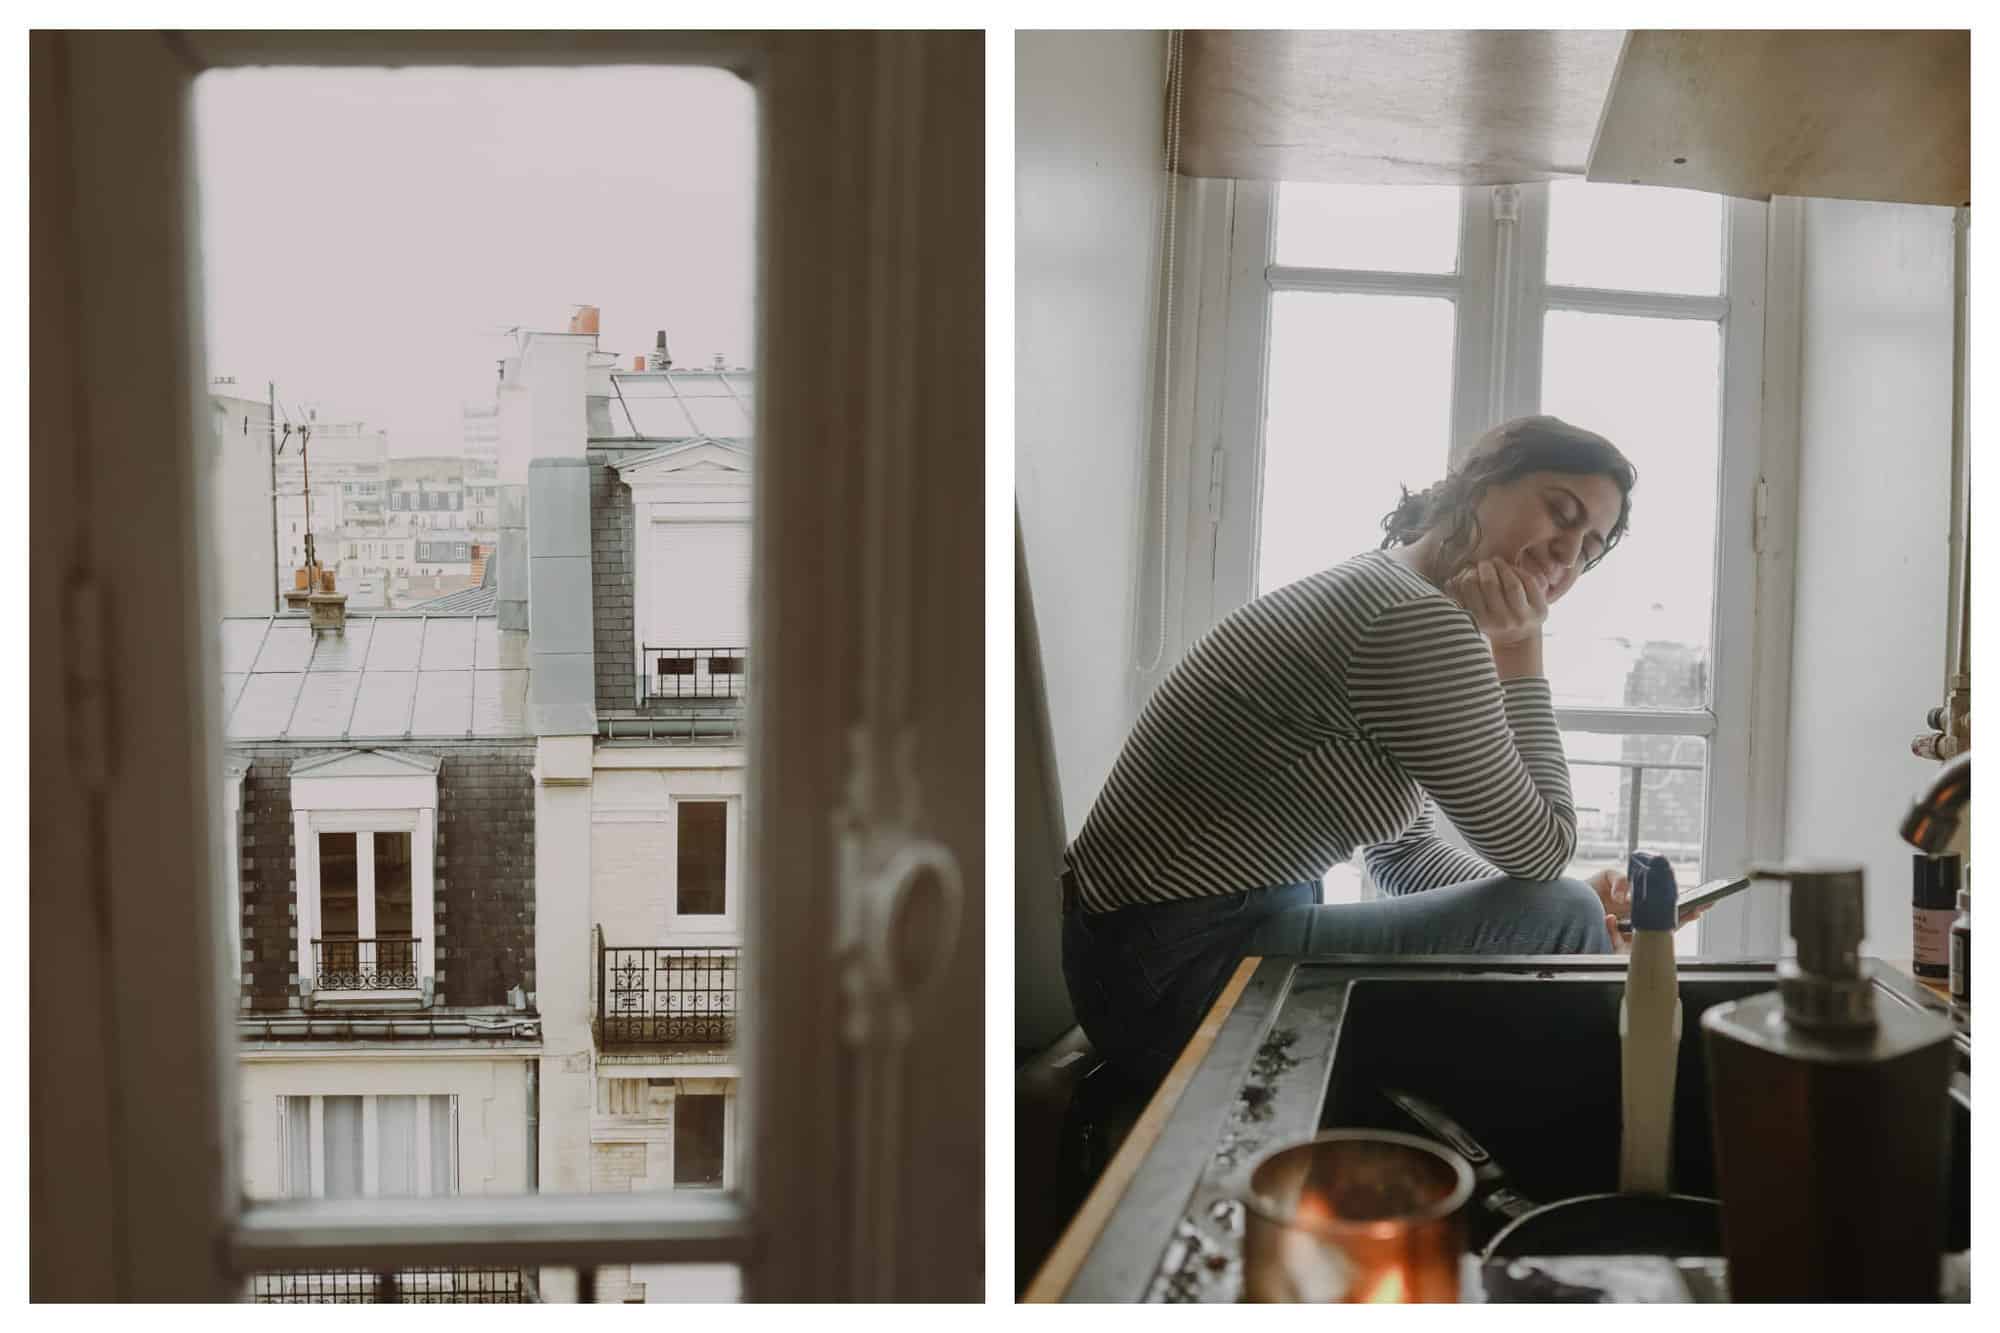 Left: A view of Parisian rooftops and top floors from a window on a cold, gray day. Right: The author is hanging out beside her kitchen sink inside her chambre de bonne.